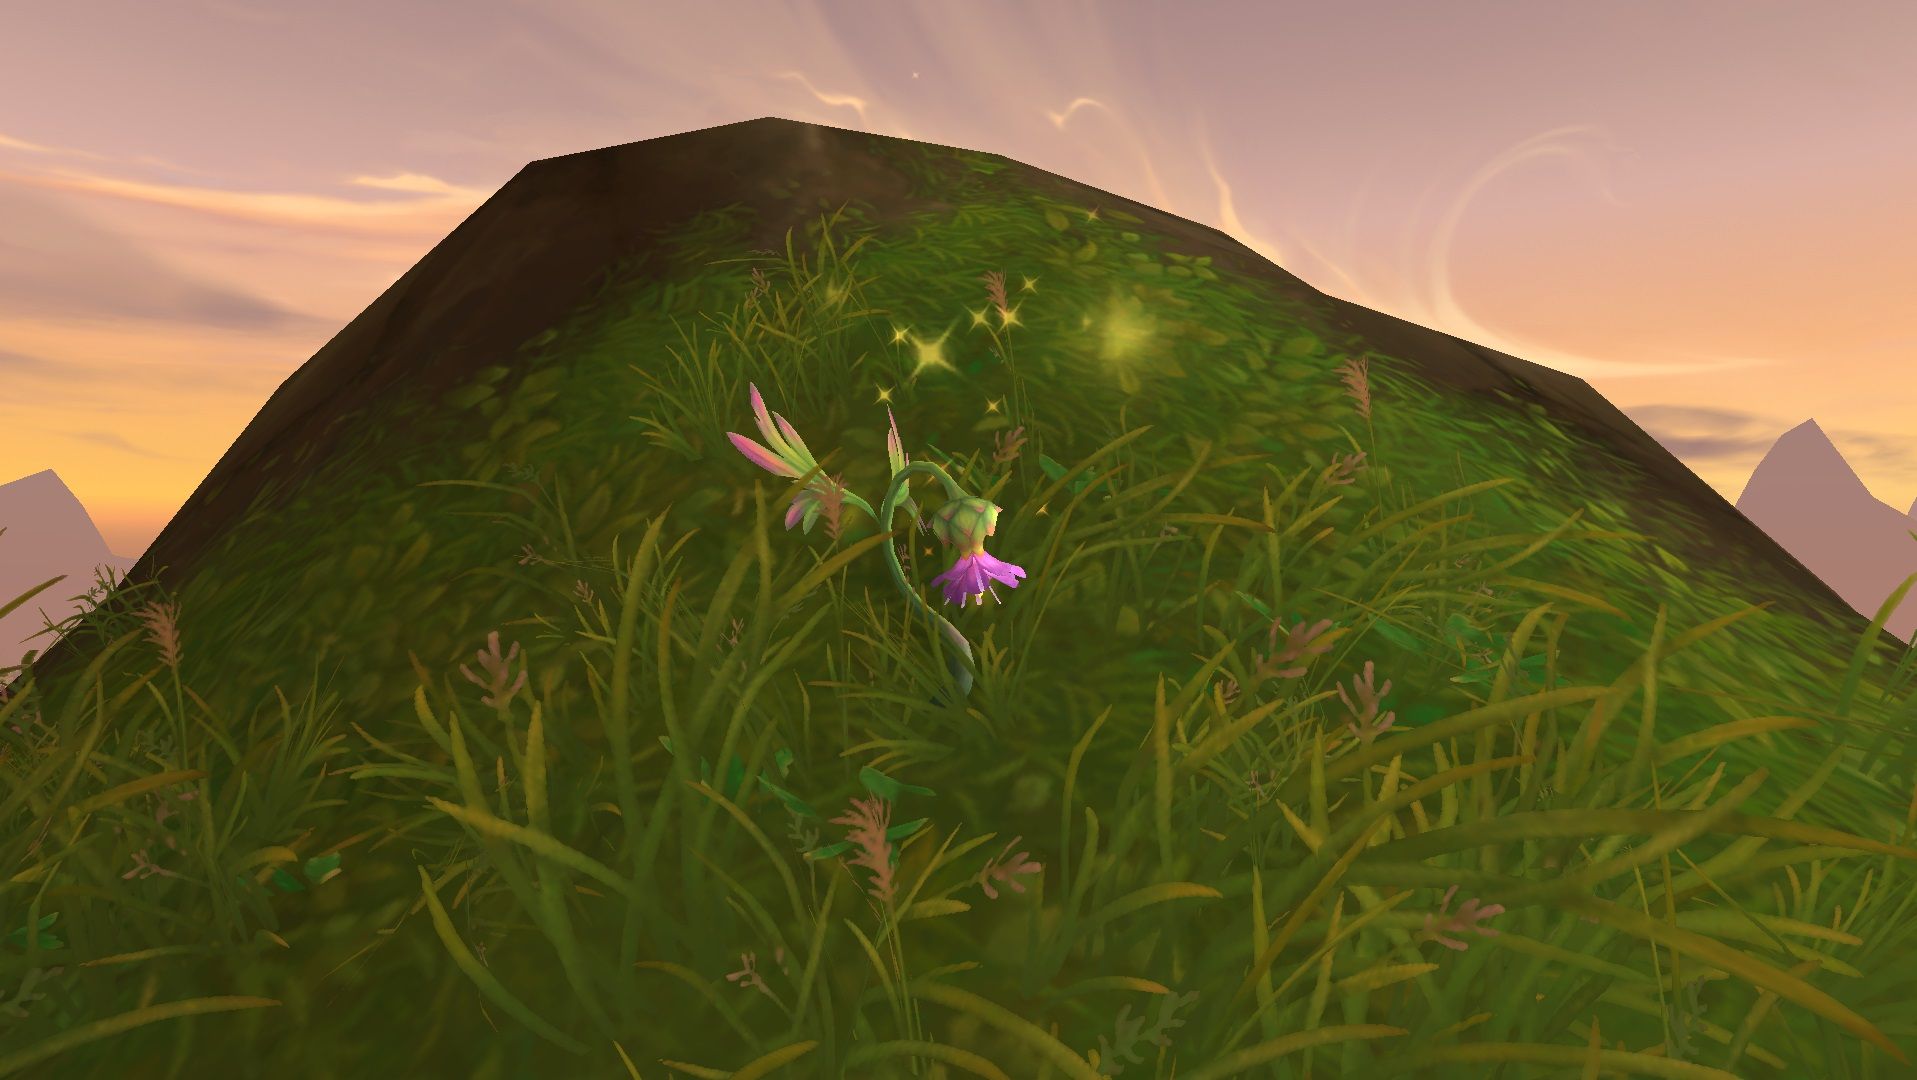 Finding a hochenblume in the Ohn'ahran Plains in World of Warcraft.